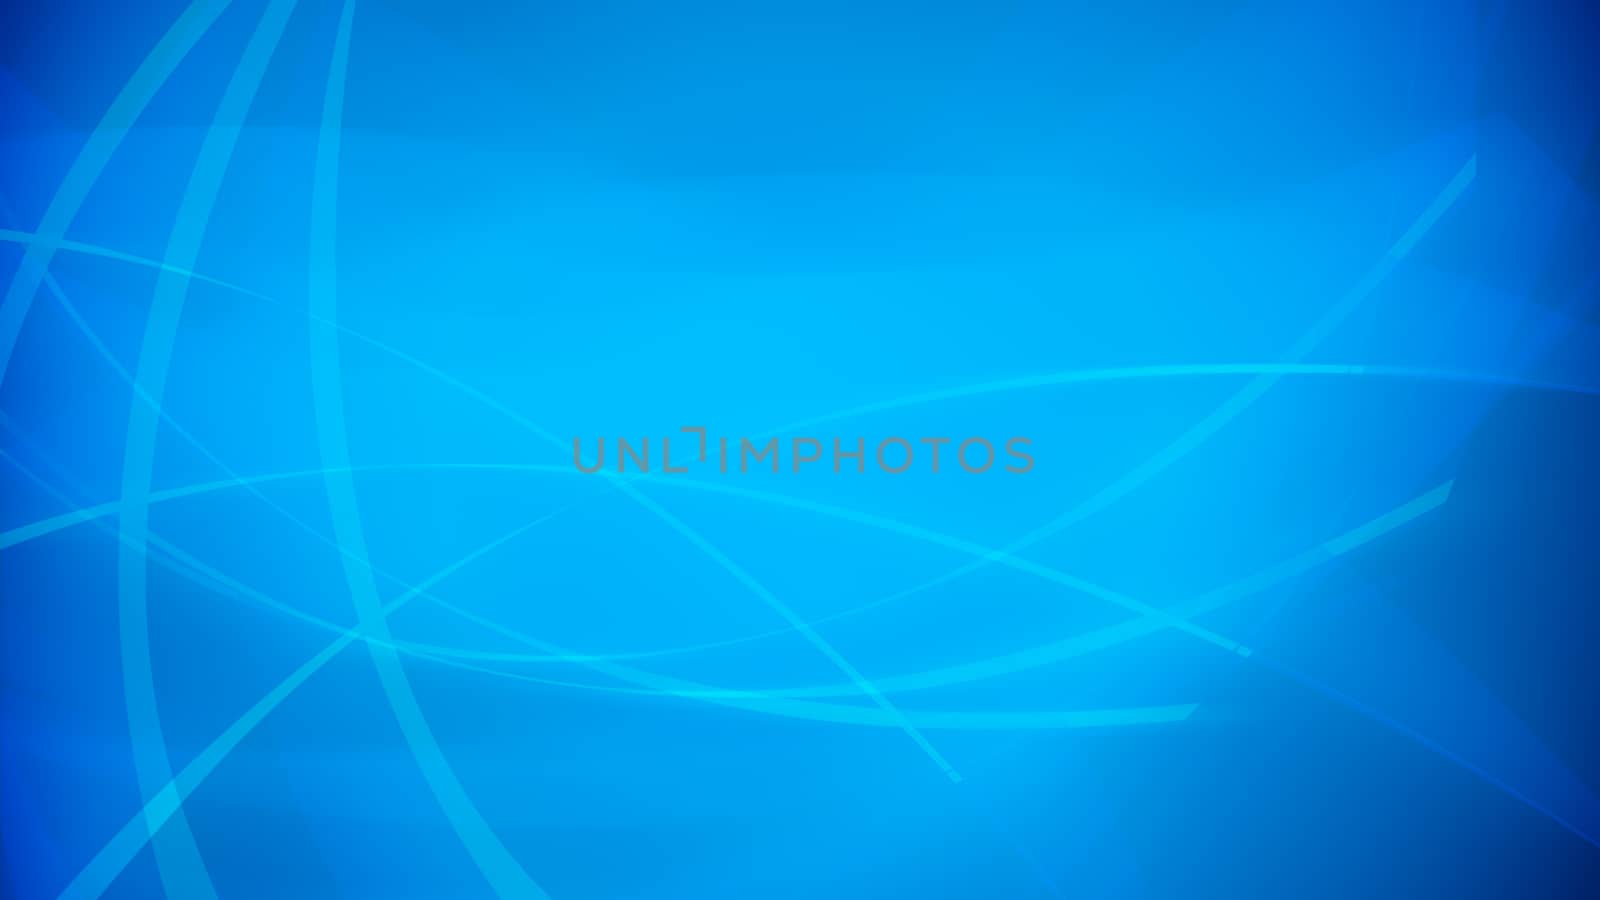 Illustration of Blue Soft Abstract Business background. 